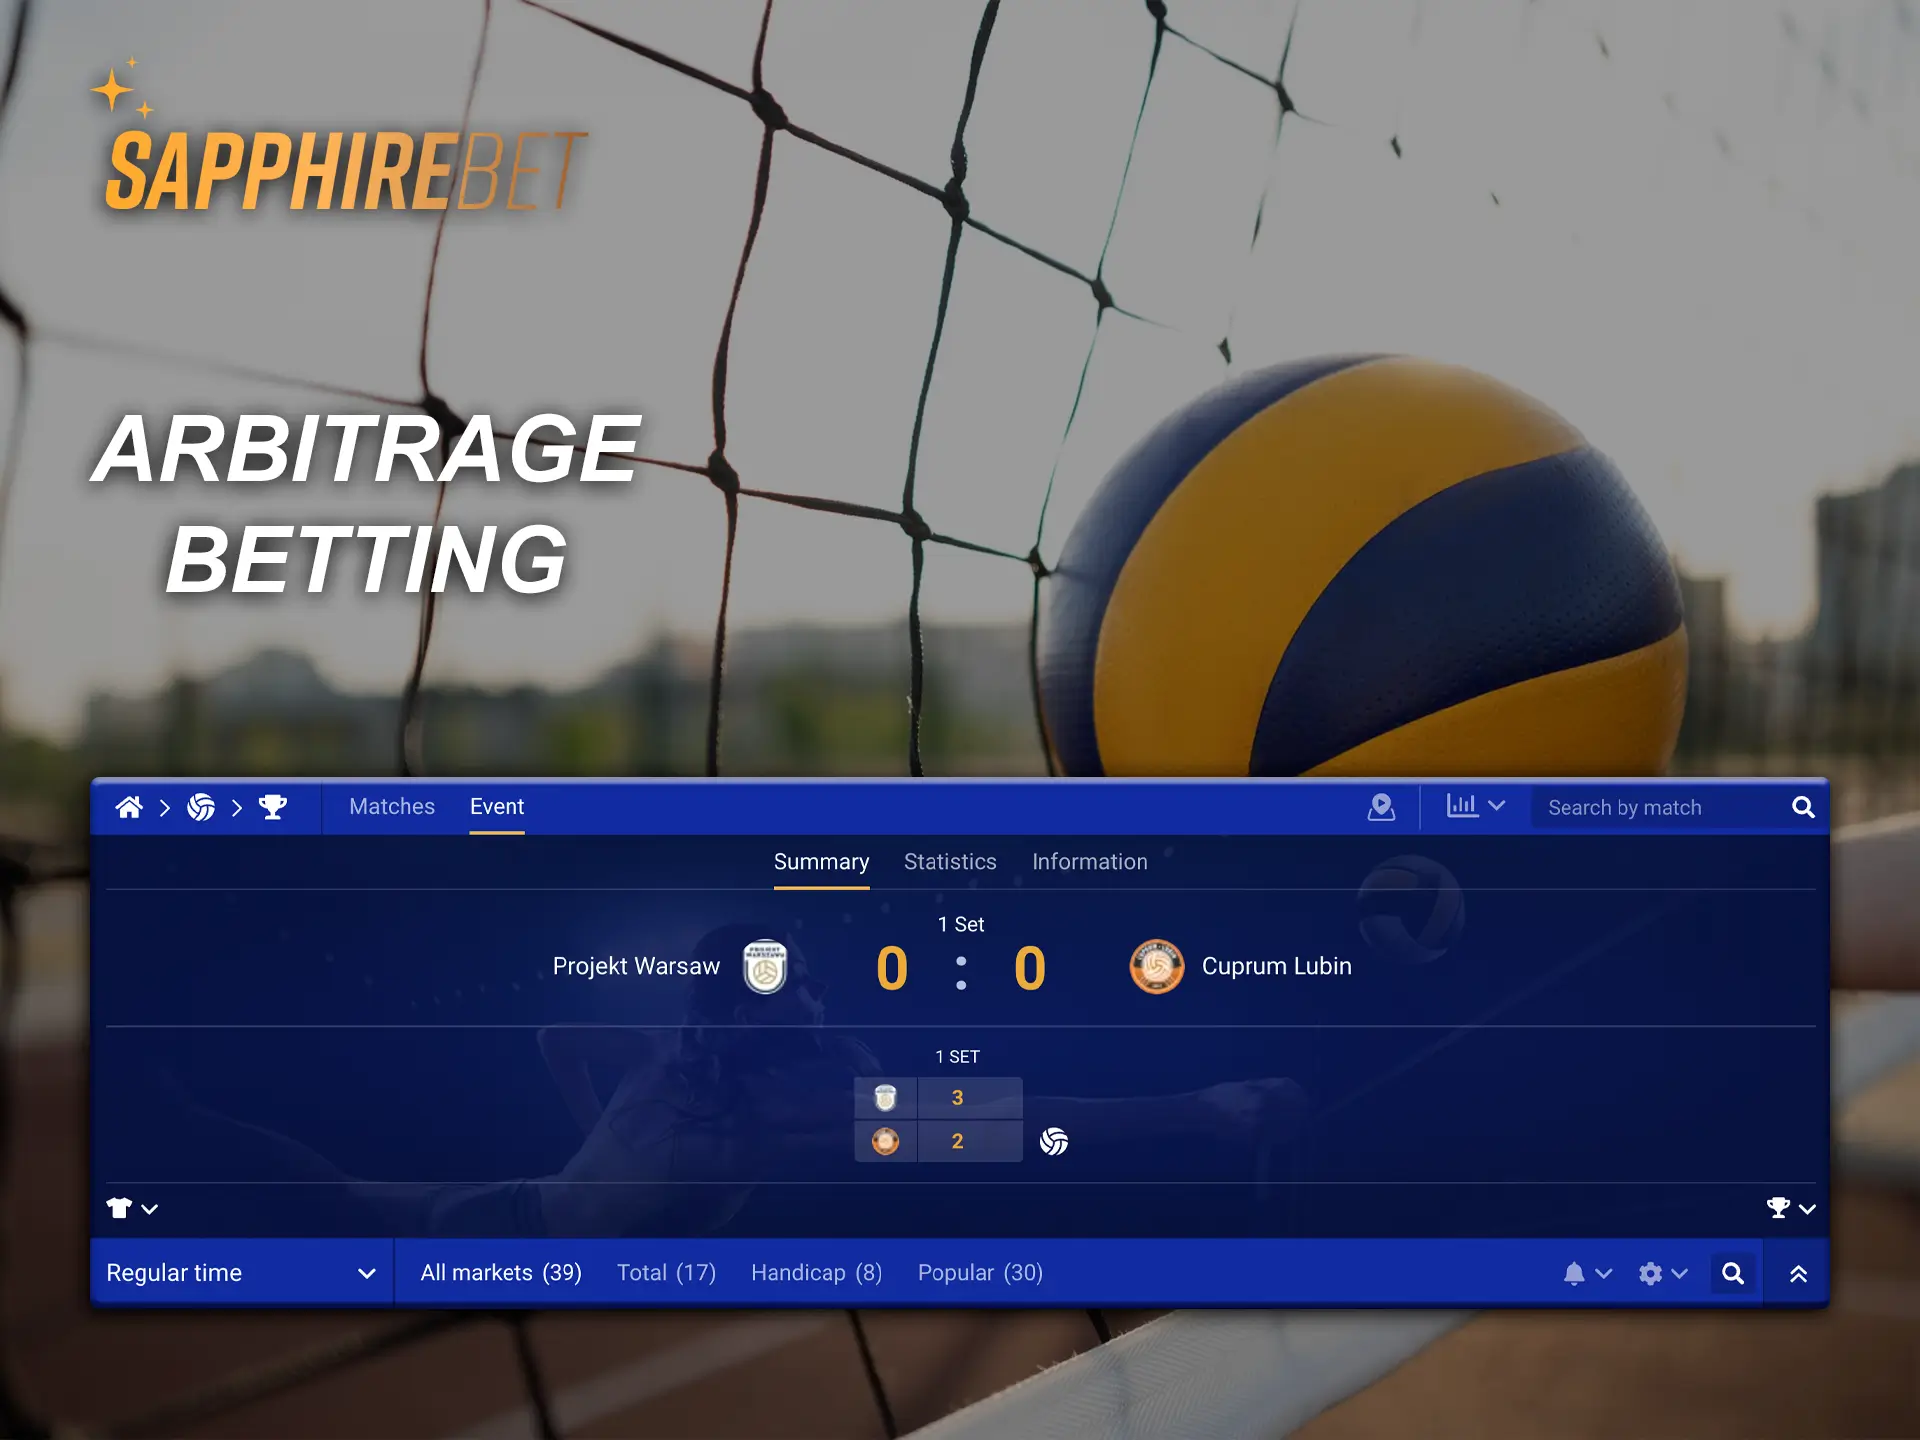 You will definitely win if you use arbitrage in betting at Sapphirebet.